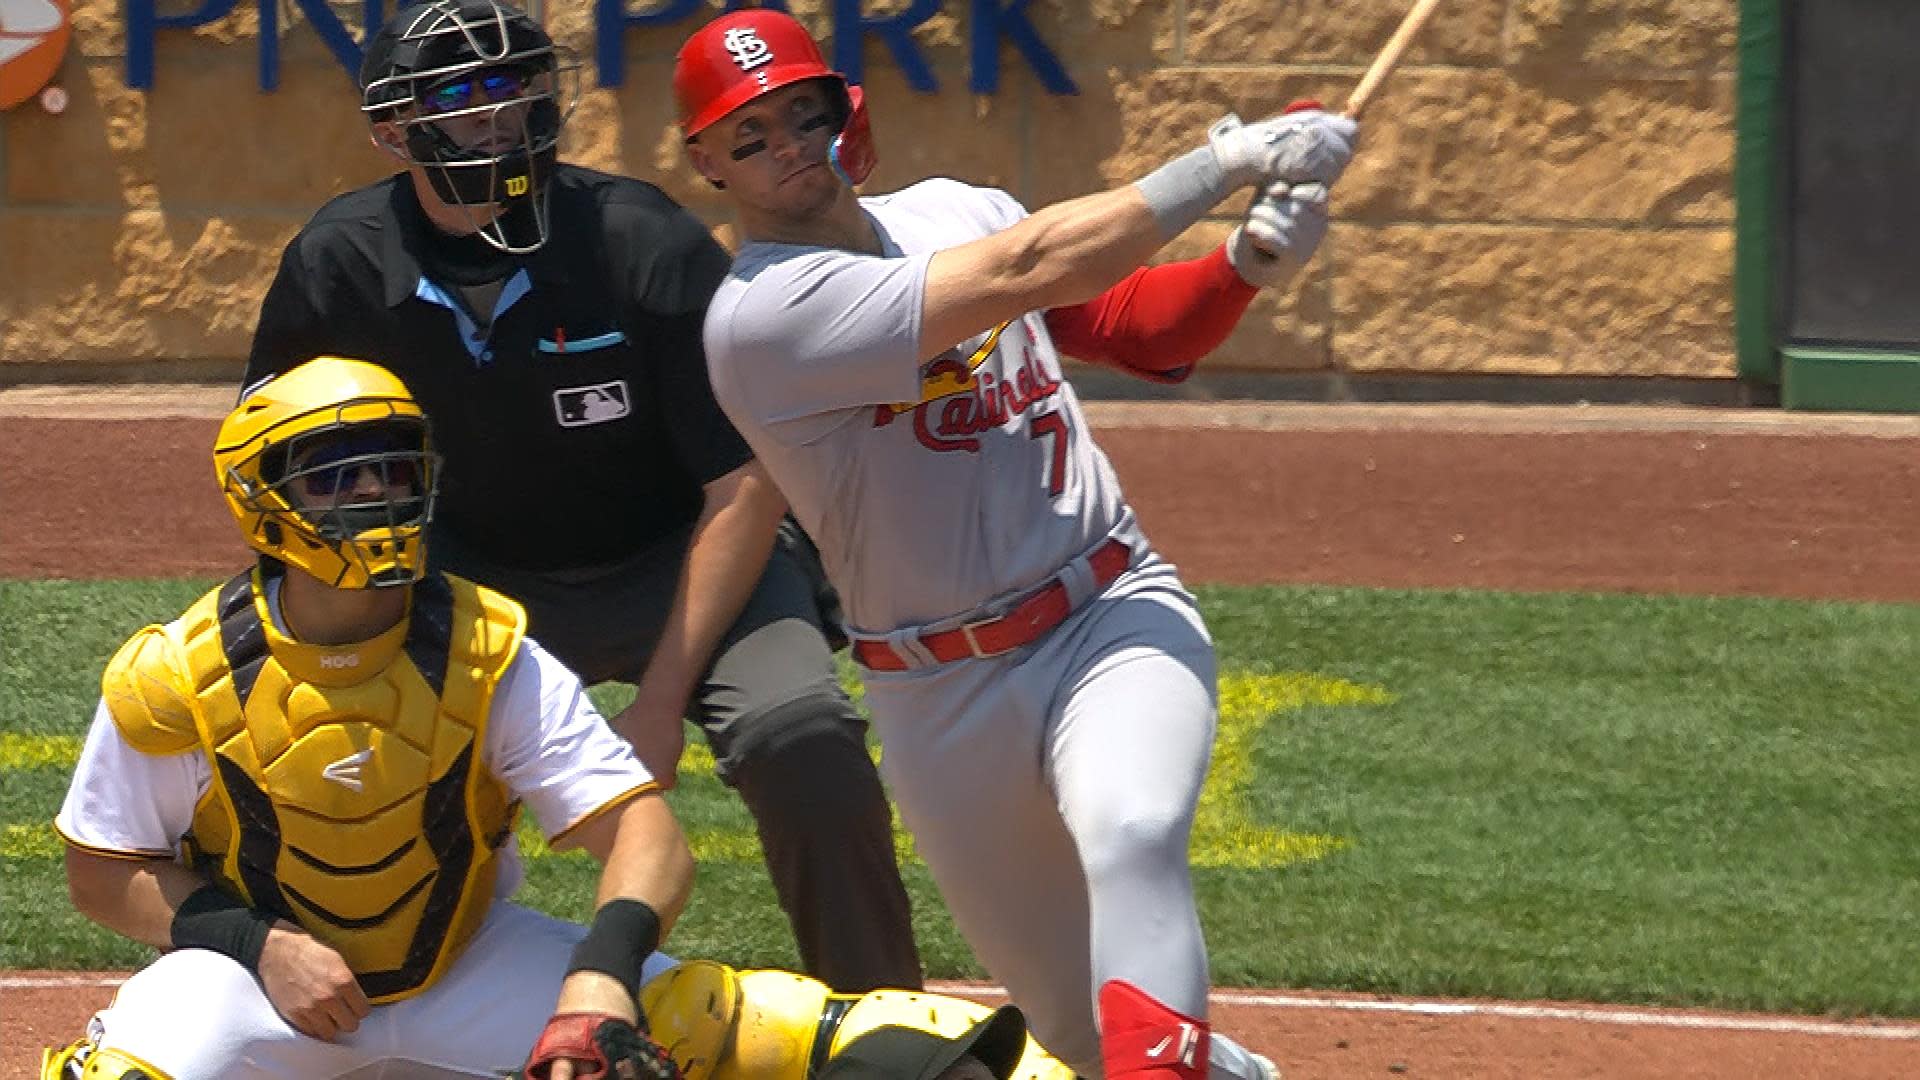 Cards' Knizner blasts a solo shot against Pirates